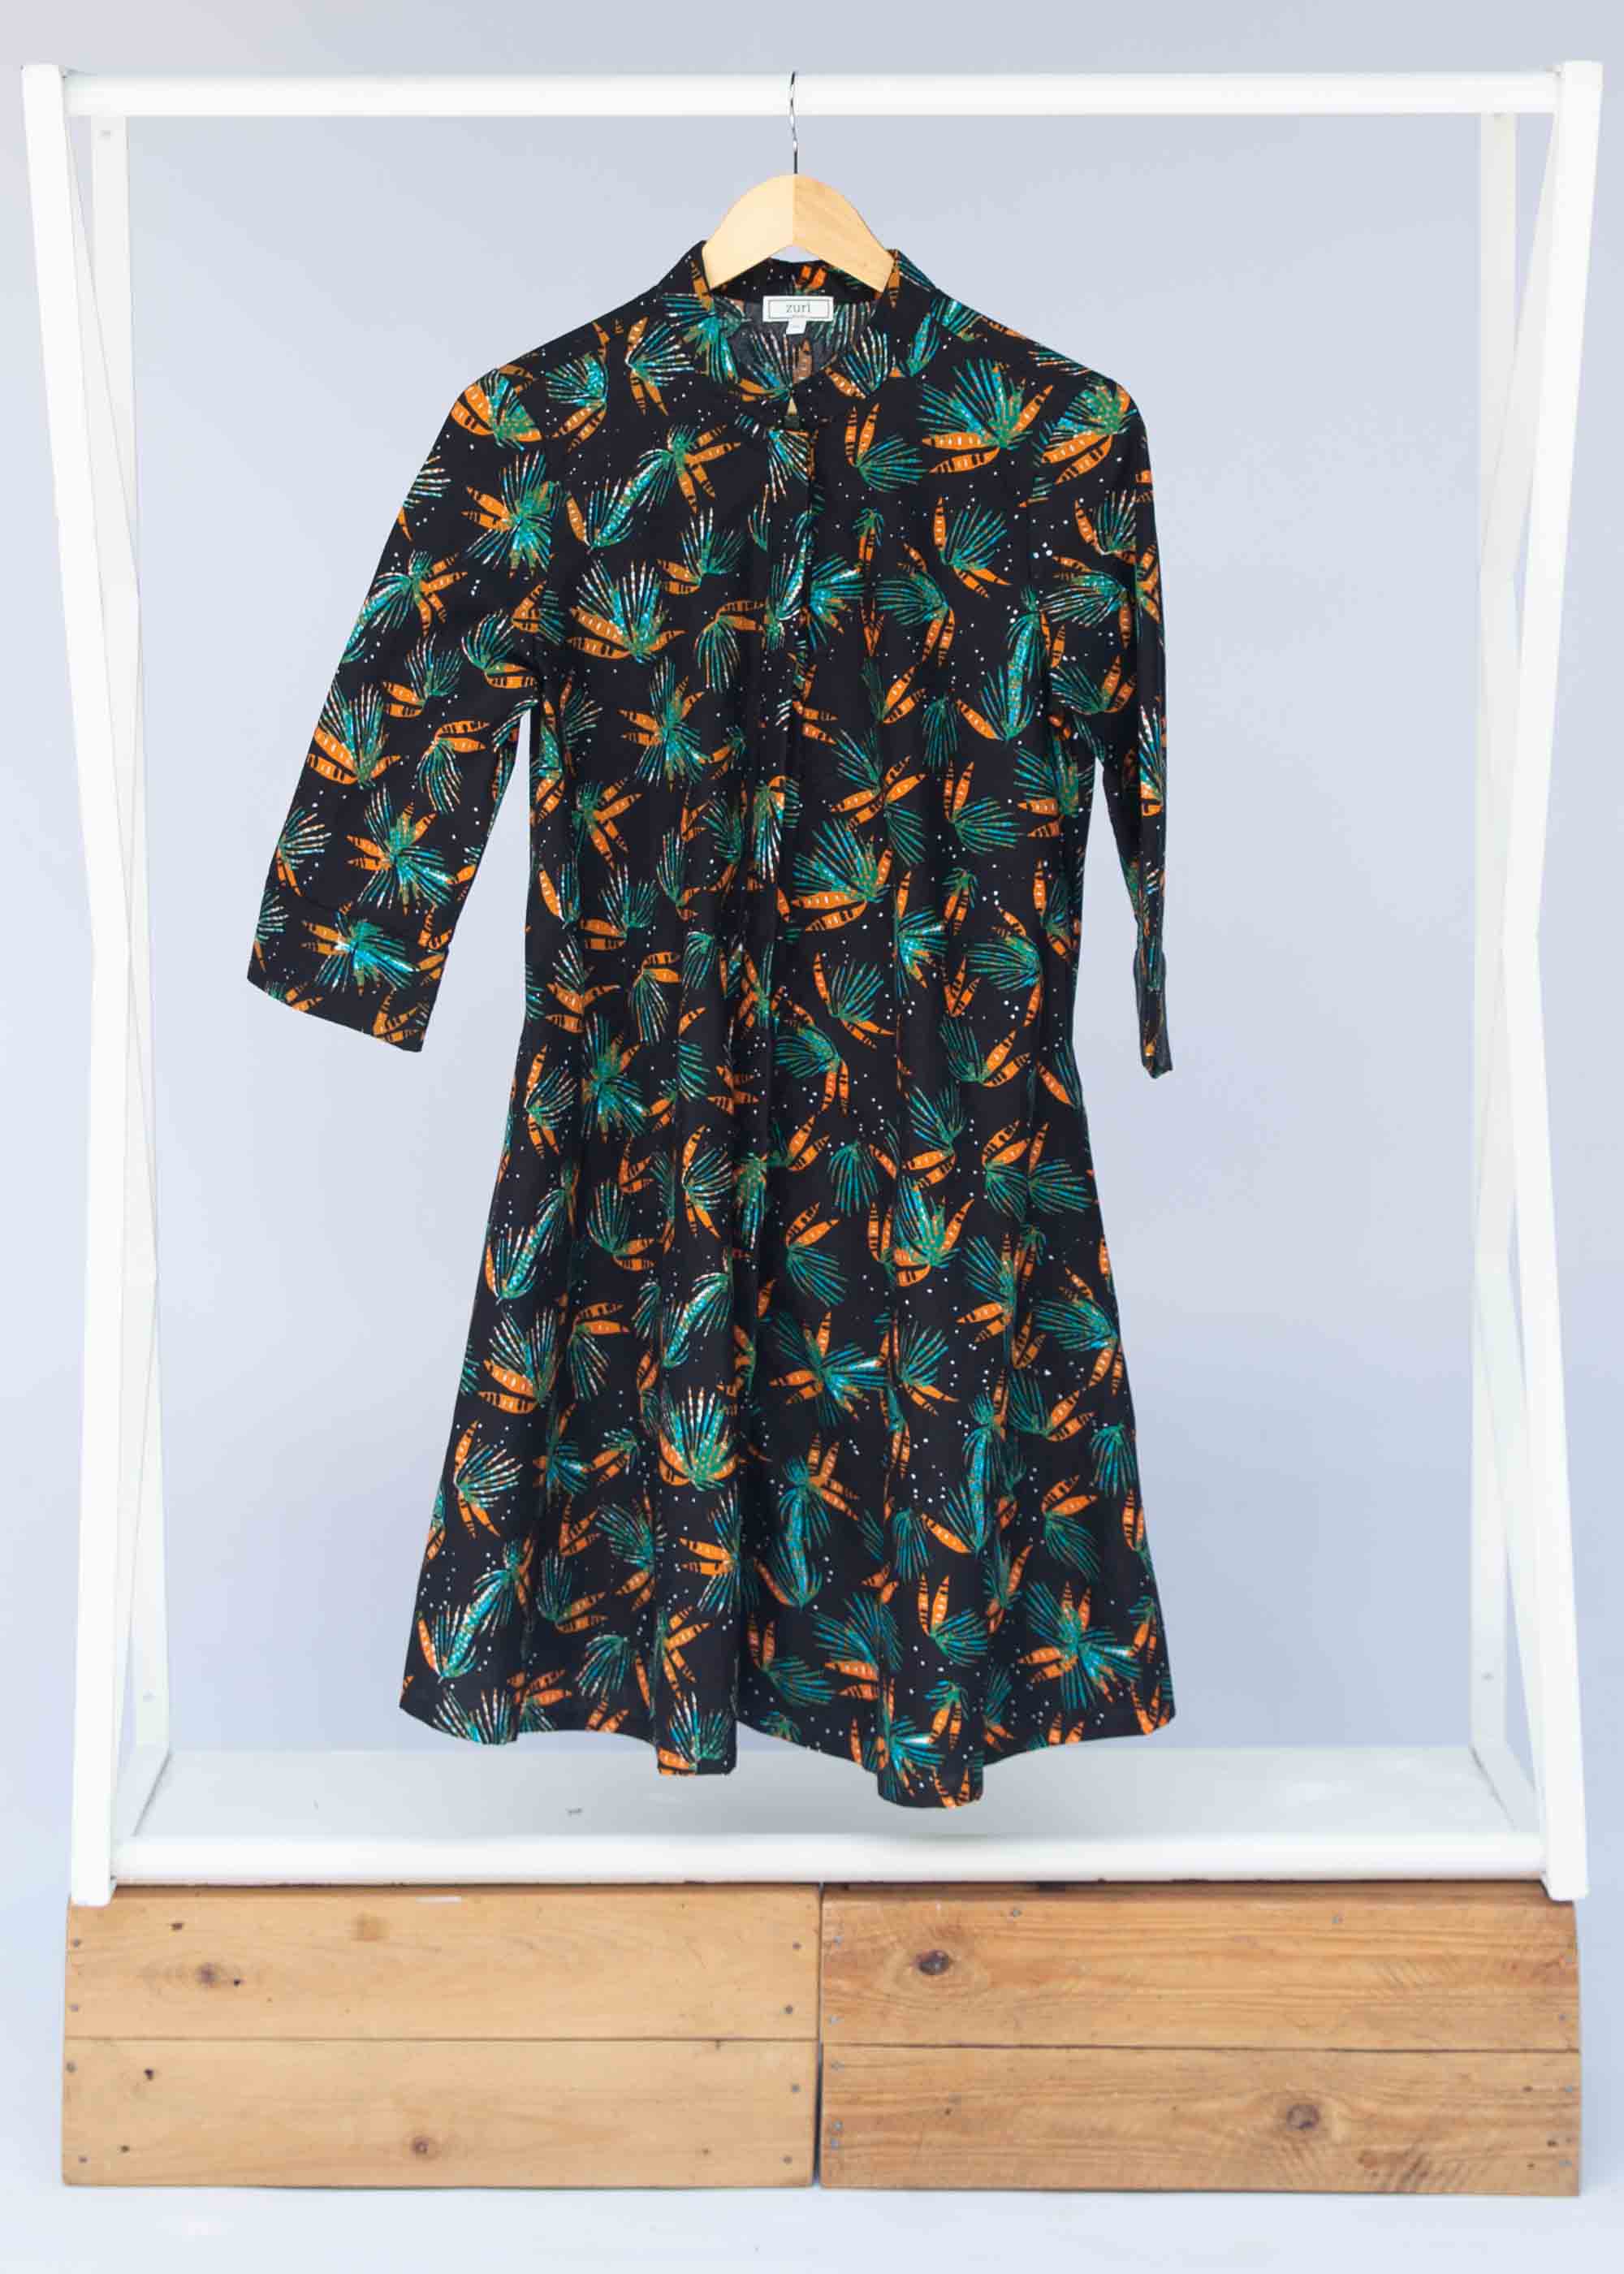 Display of black dress with teal and orange leaves with white dots.